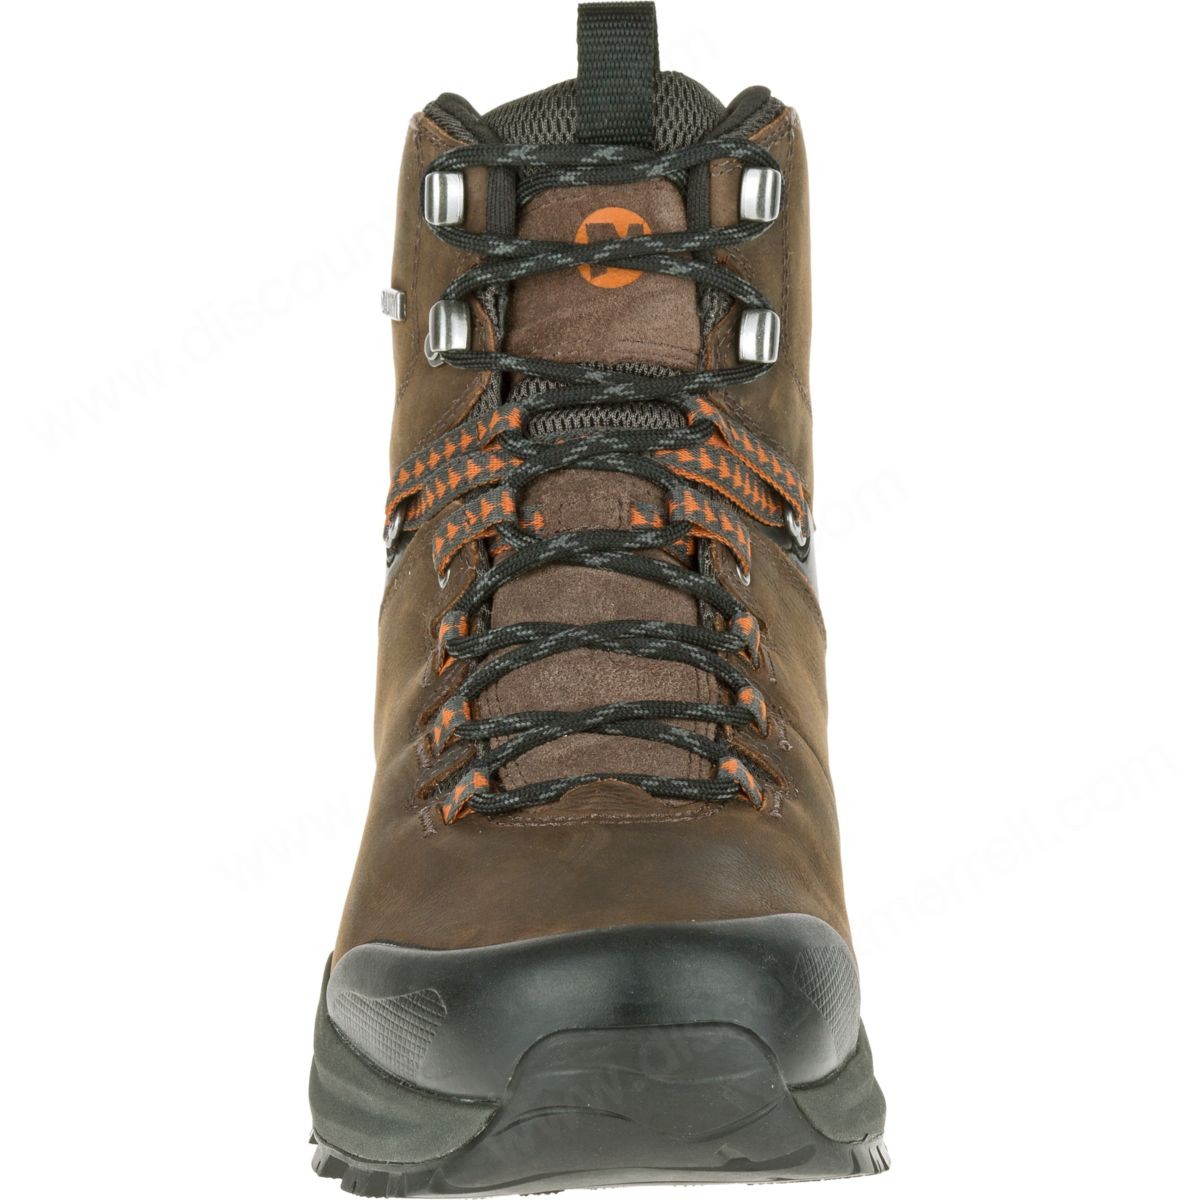 Merrell Man's Phaserbound Waterproof Clay - -4